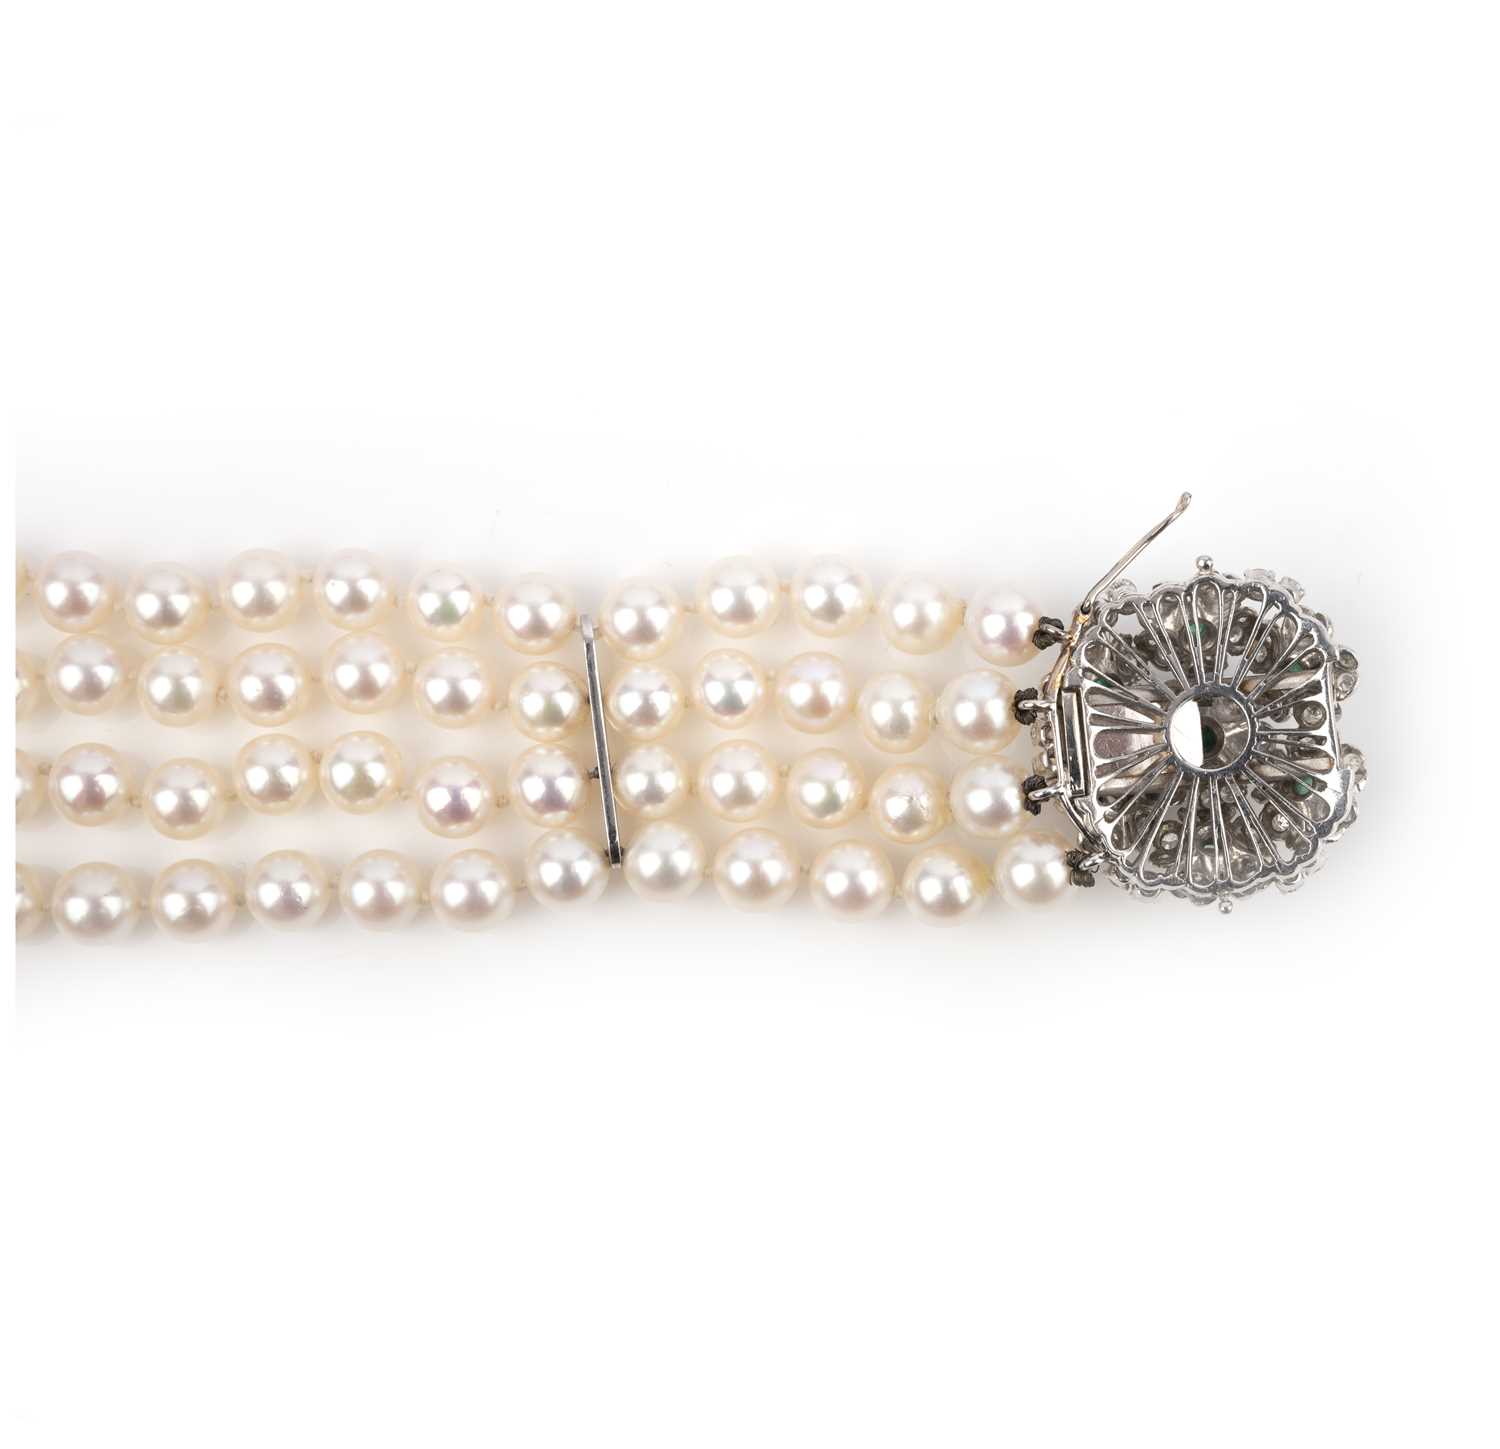 Vourakis, a cultured pearl, emerald and diamond bracelet, the clasp of floral design, set with - Image 2 of 4